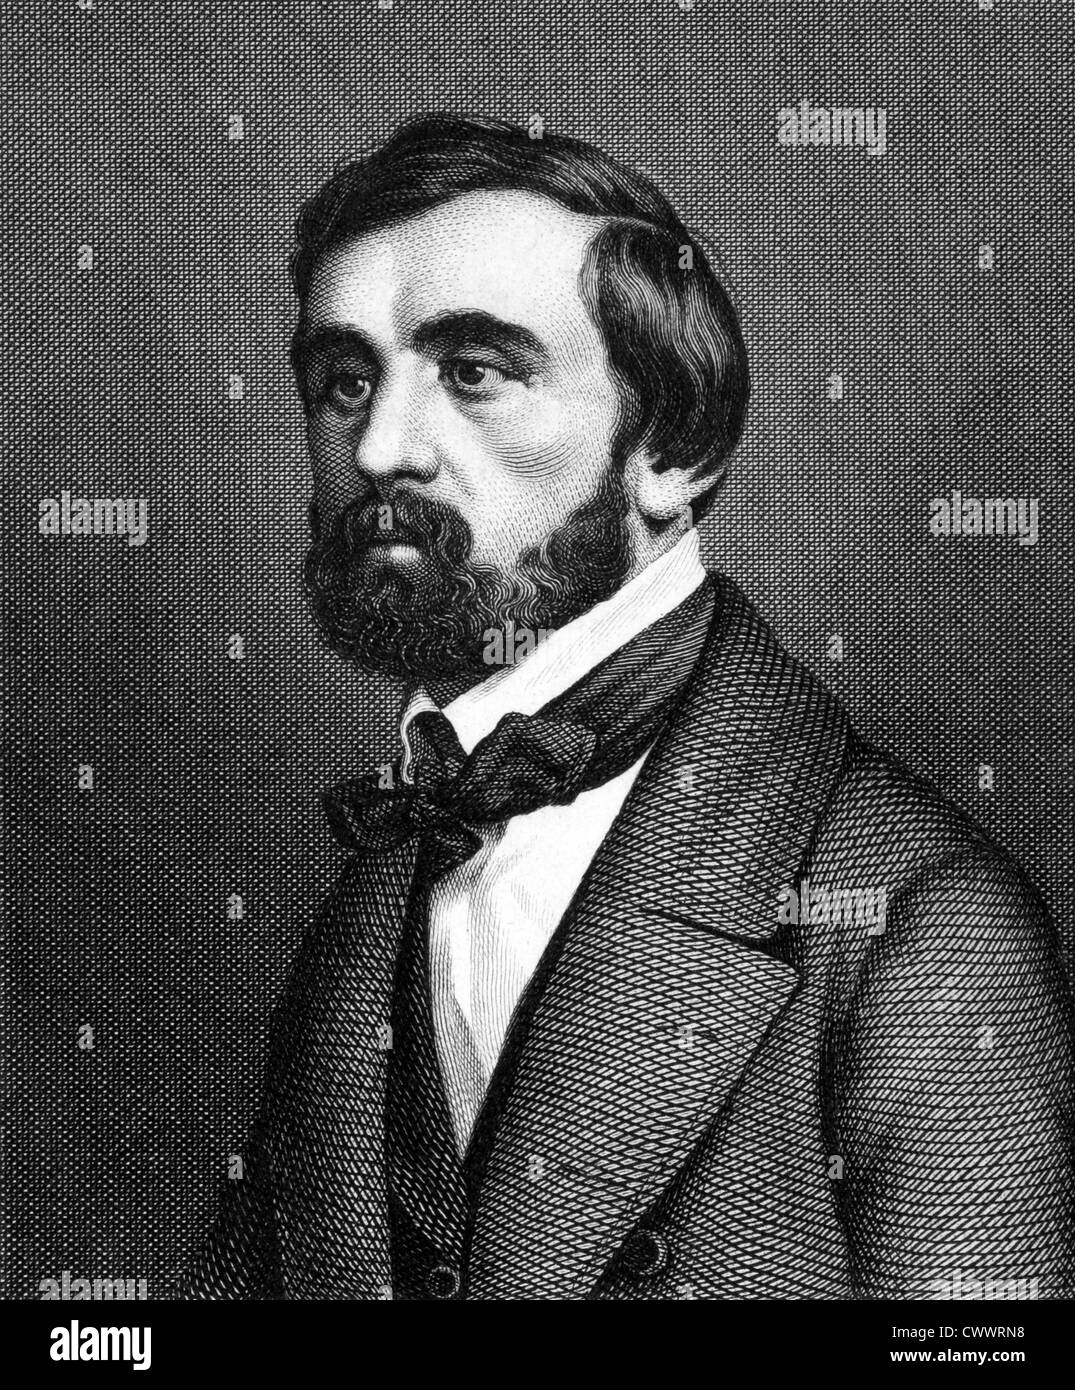 Ludwig Simon (1819-1872) on engraving from 1859. German politician ...